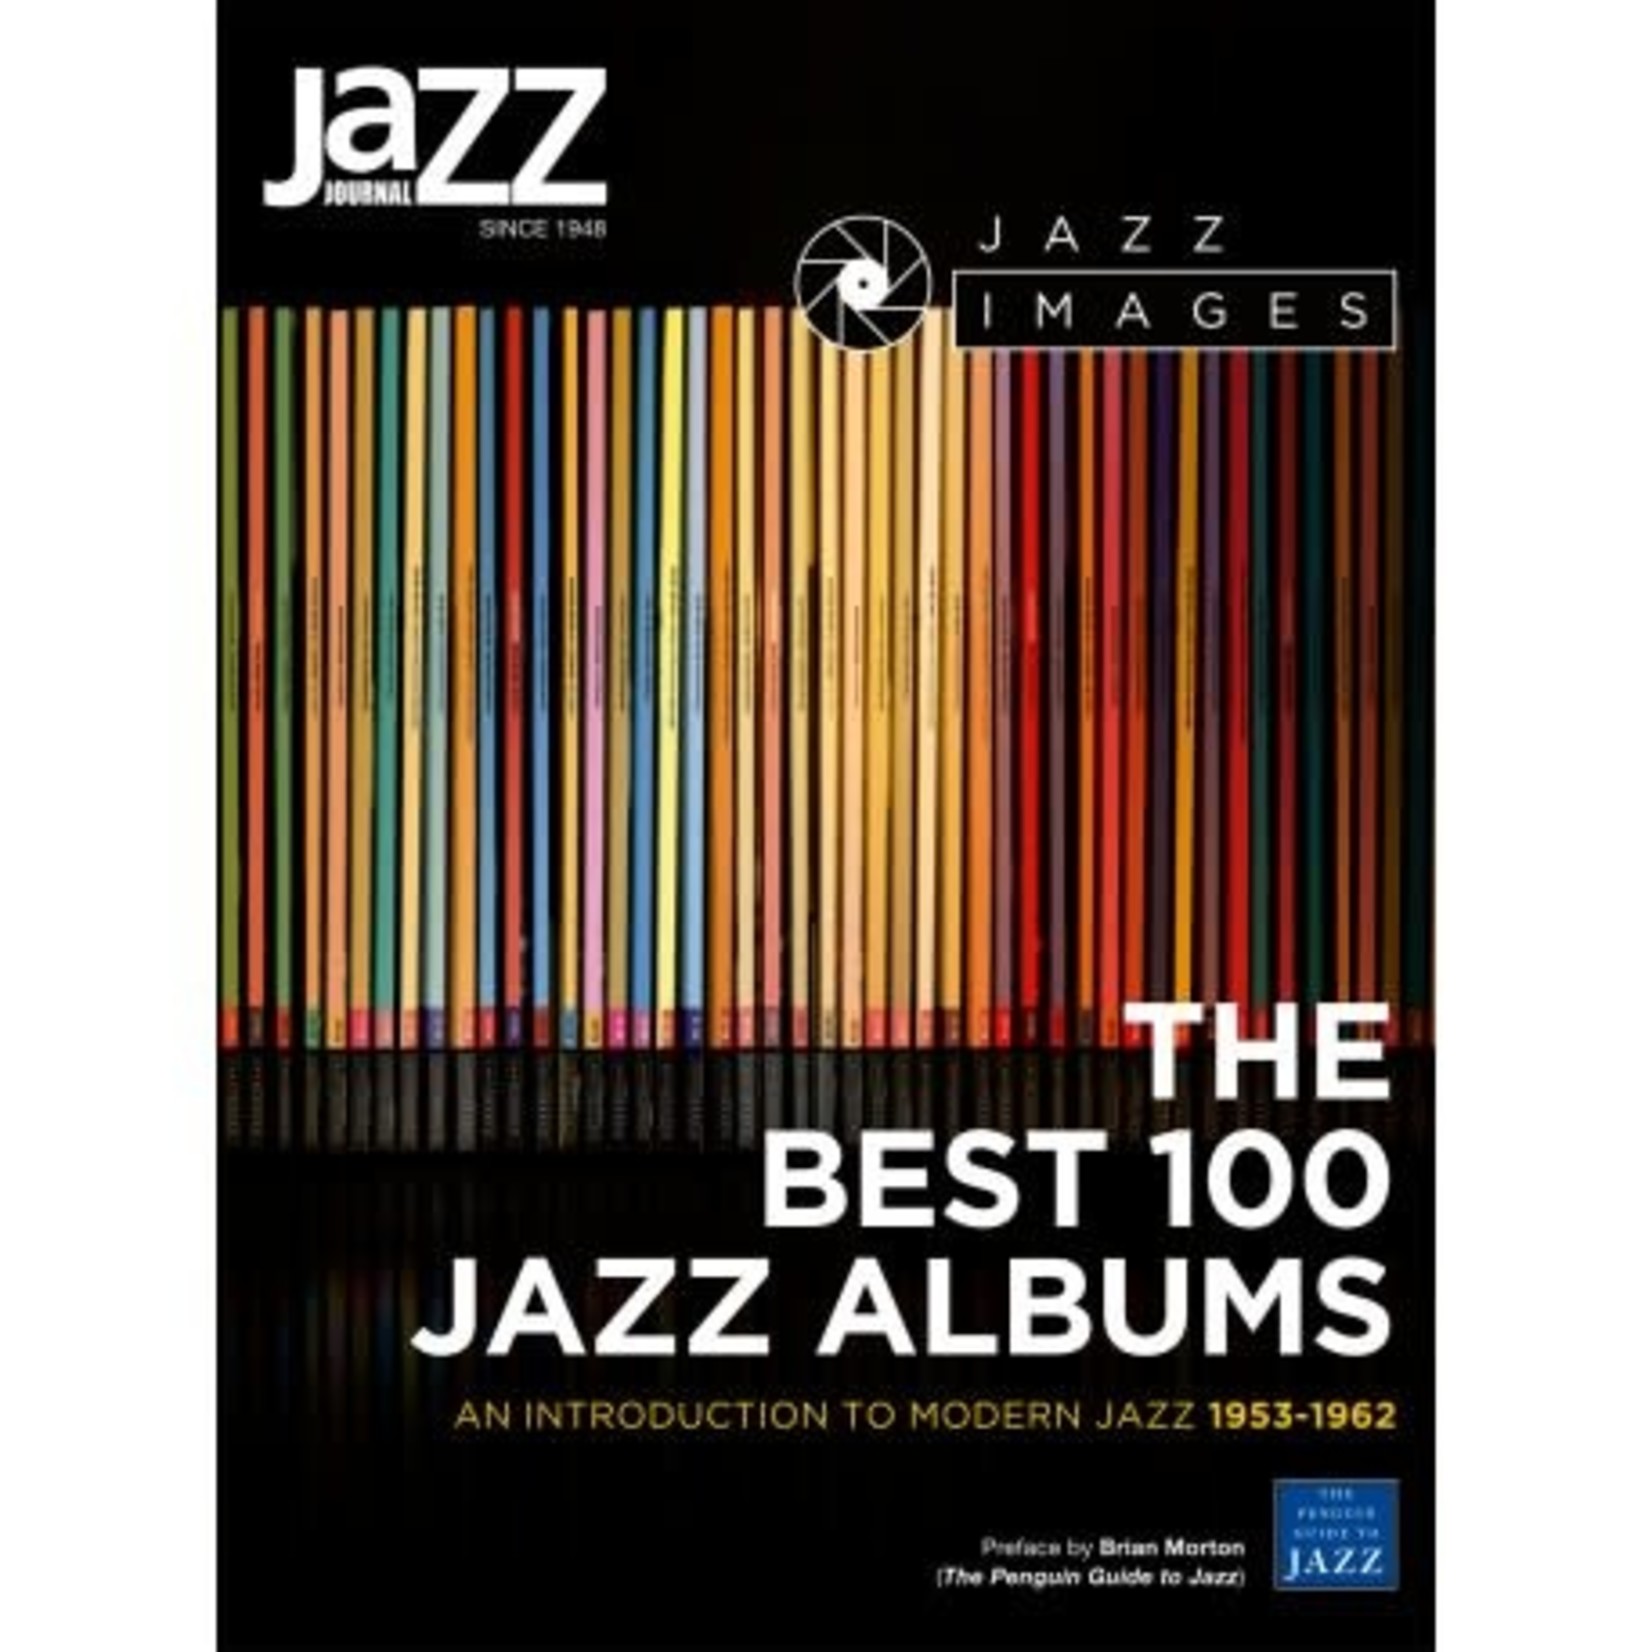 Accessory The Best 100 Jazz Albums